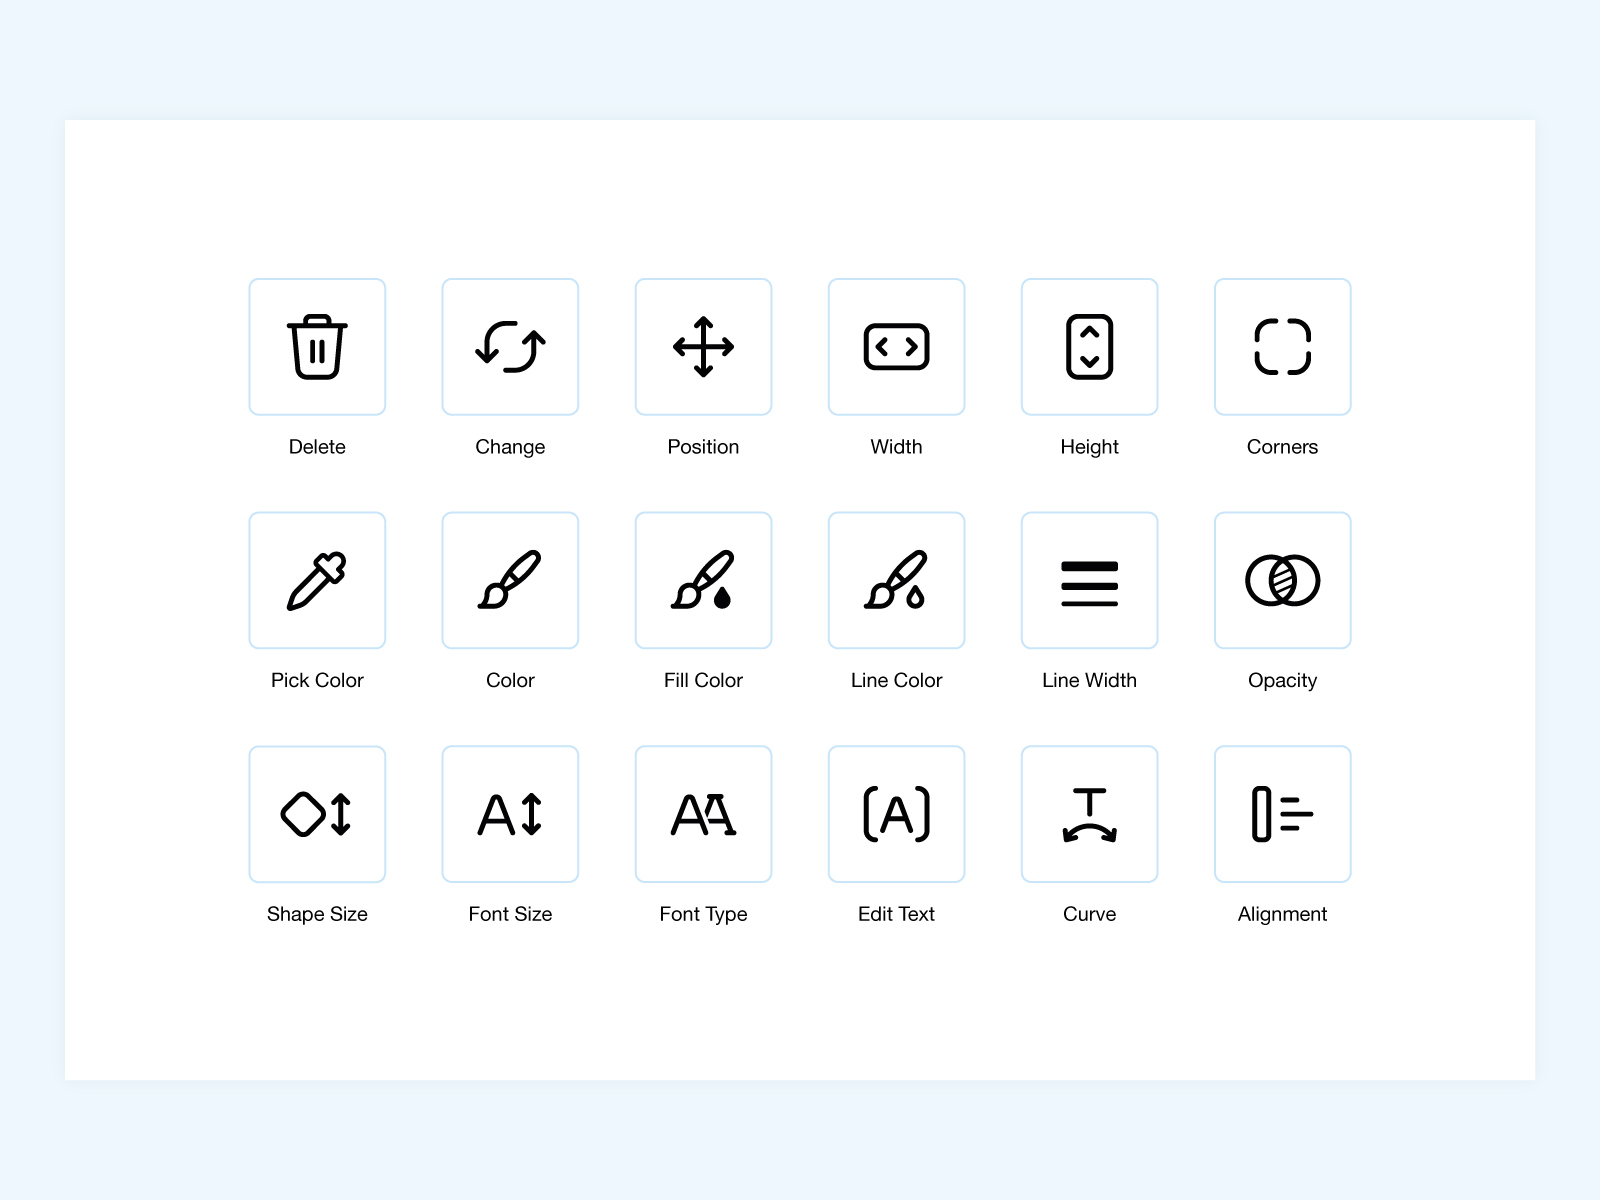 Wix Logo Maker by Shay Zuck for Wix Design Team on Dribbble